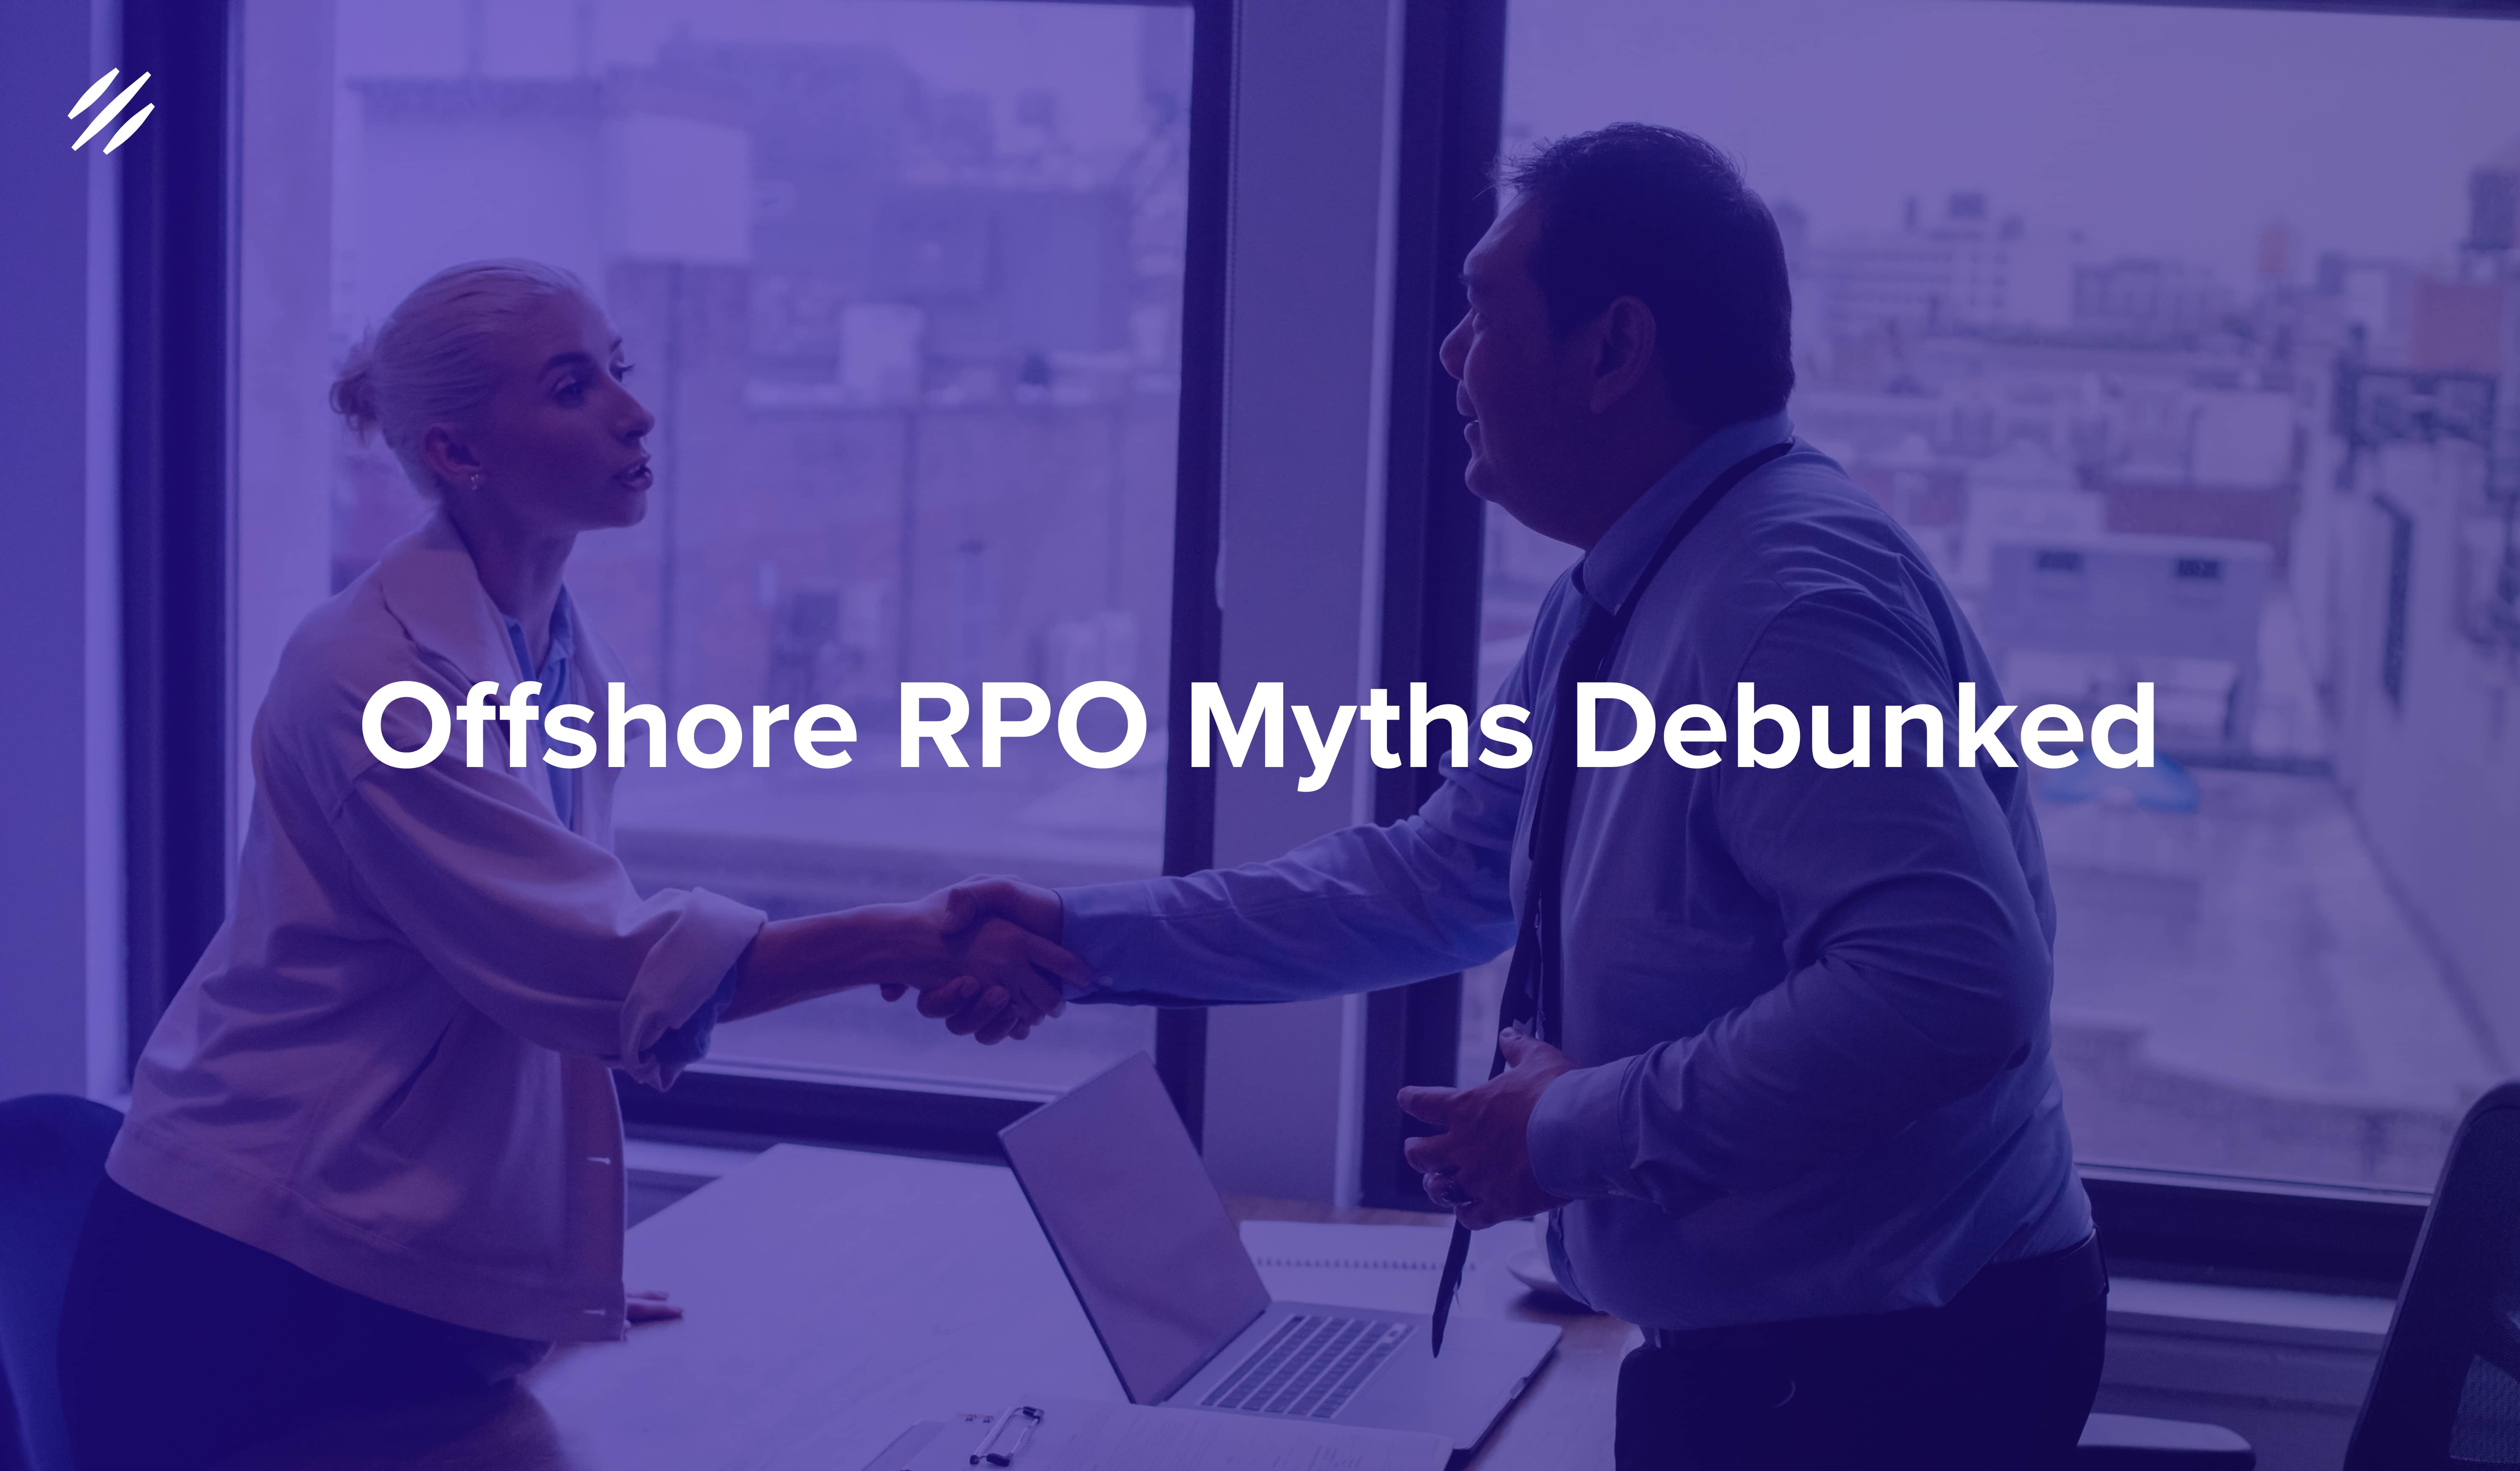 5 Offshore RPO Myths Debunked